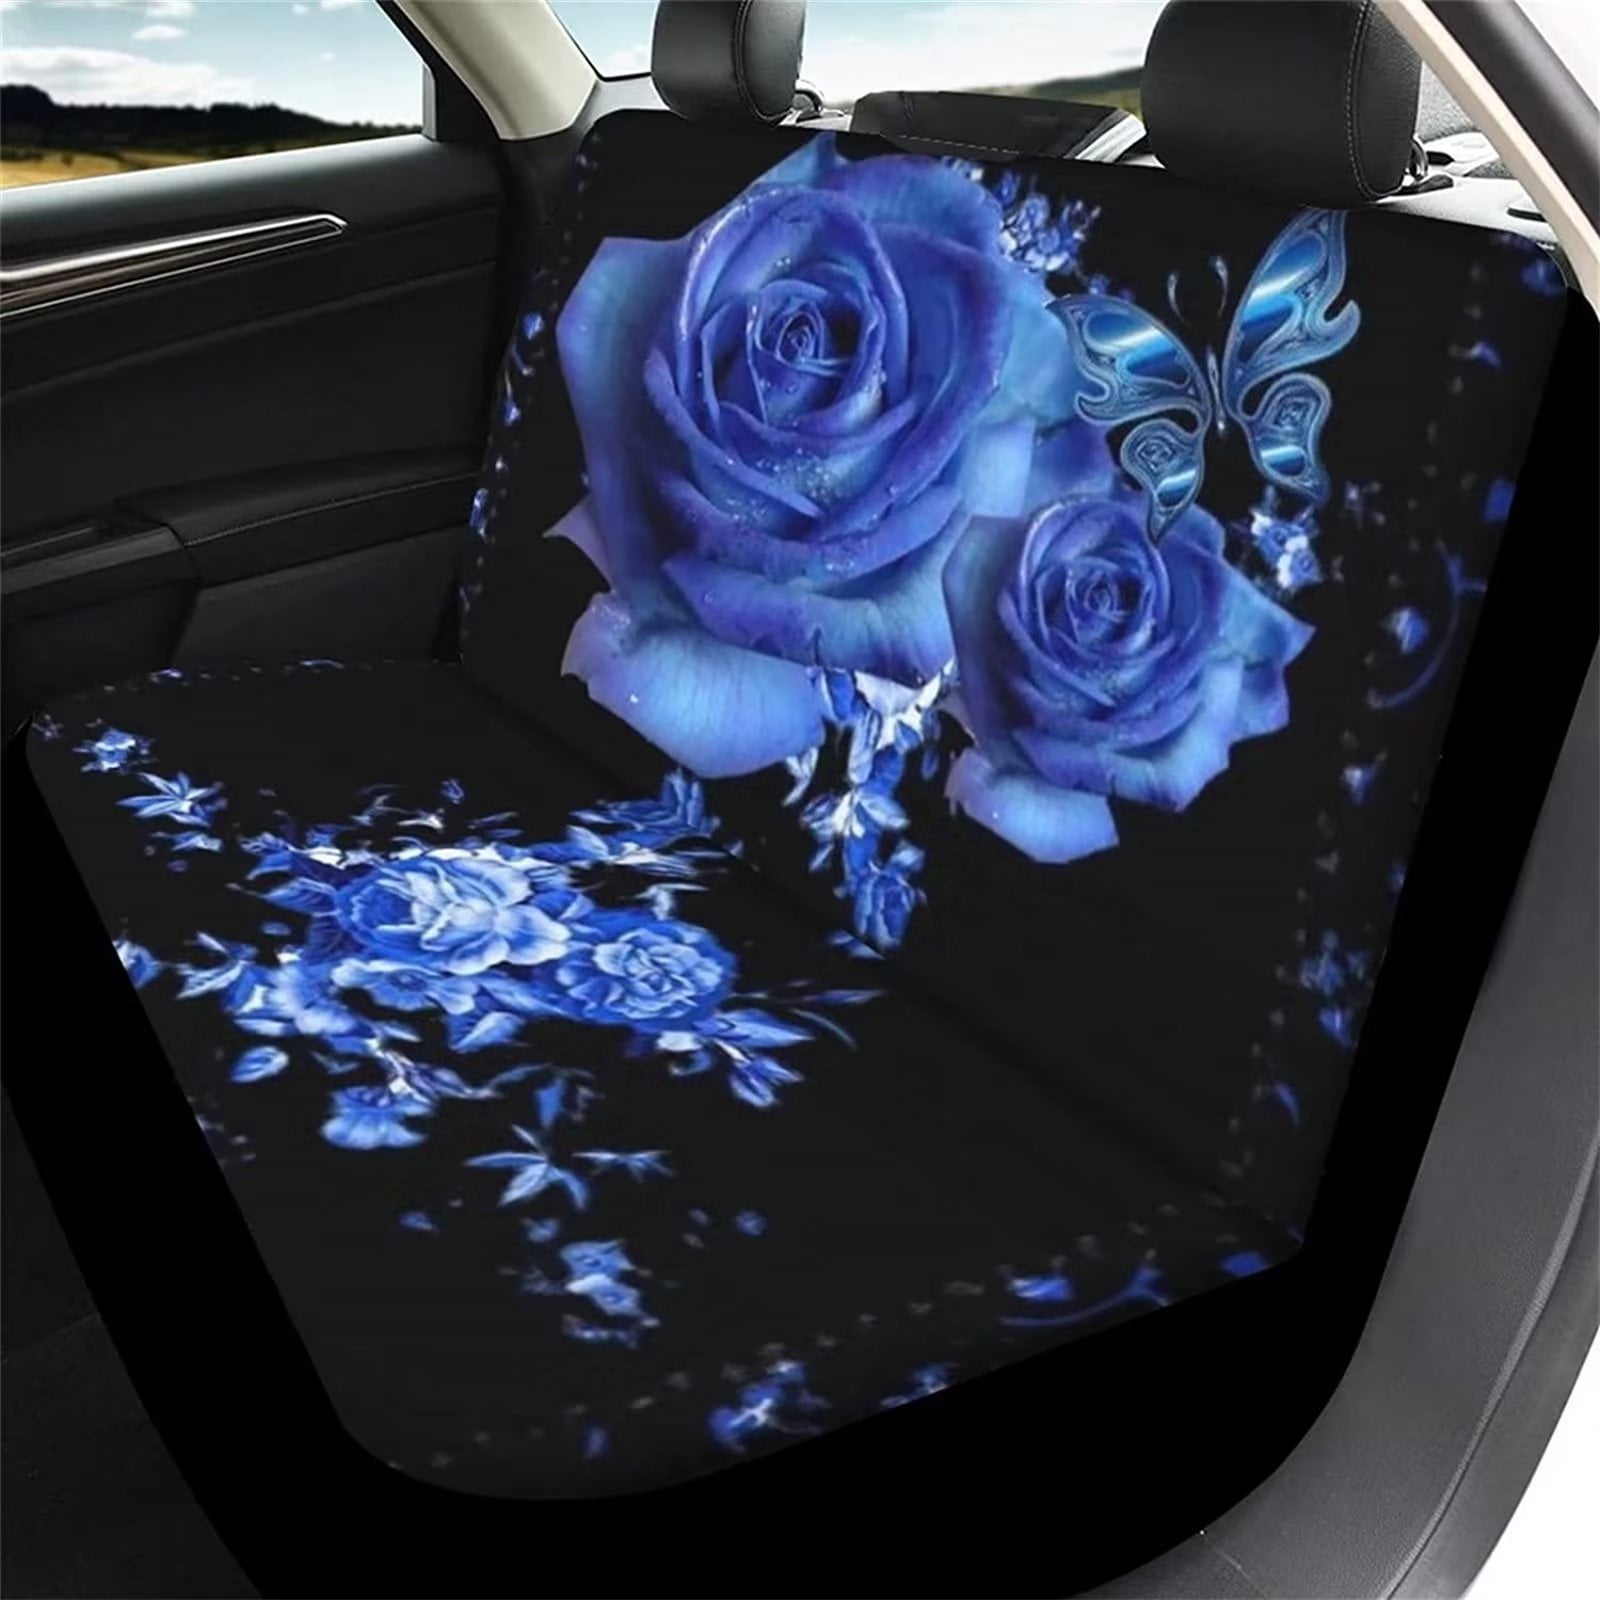 FKELYI Romantic Blue Rose Print Car Seat Cover Interior Decor for Women  Men,Stretchy Vehicle Interior Protectors,Blanket Car Seat Cover Decor  Accessories for Most Cars,SUVs and Vans 